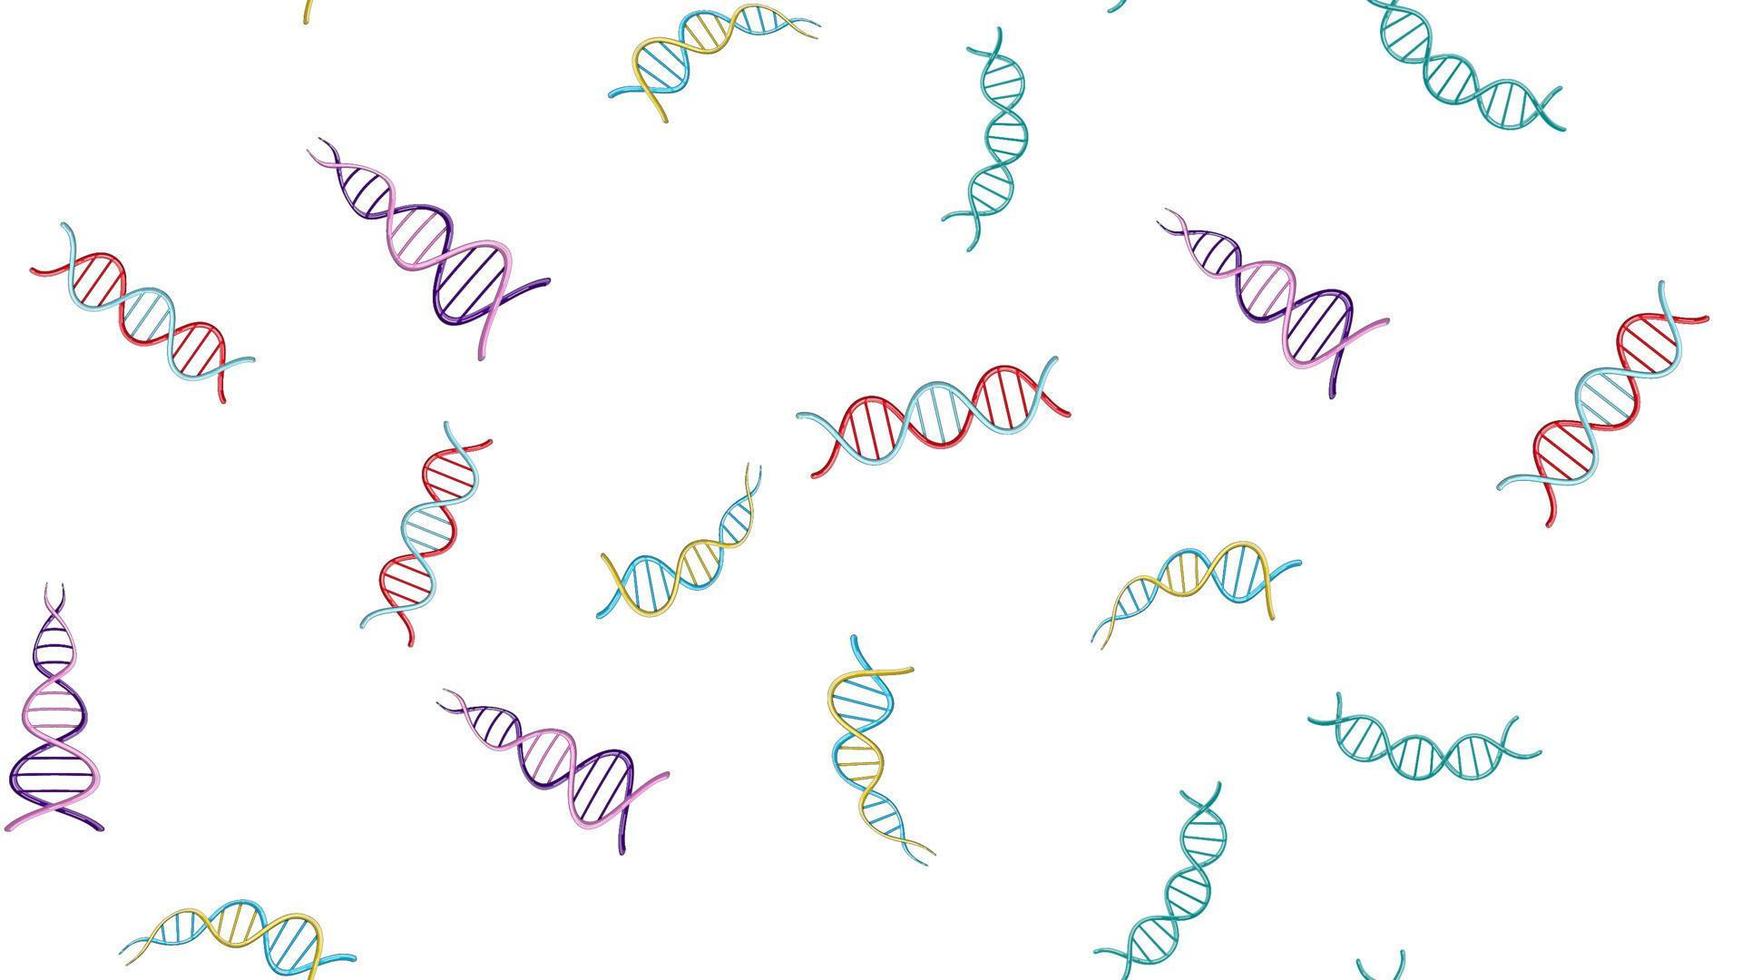 Seamless pattern texture of endless repetitive medical scientific abstract structures of dna gene molecules models on white background. Vector illustration